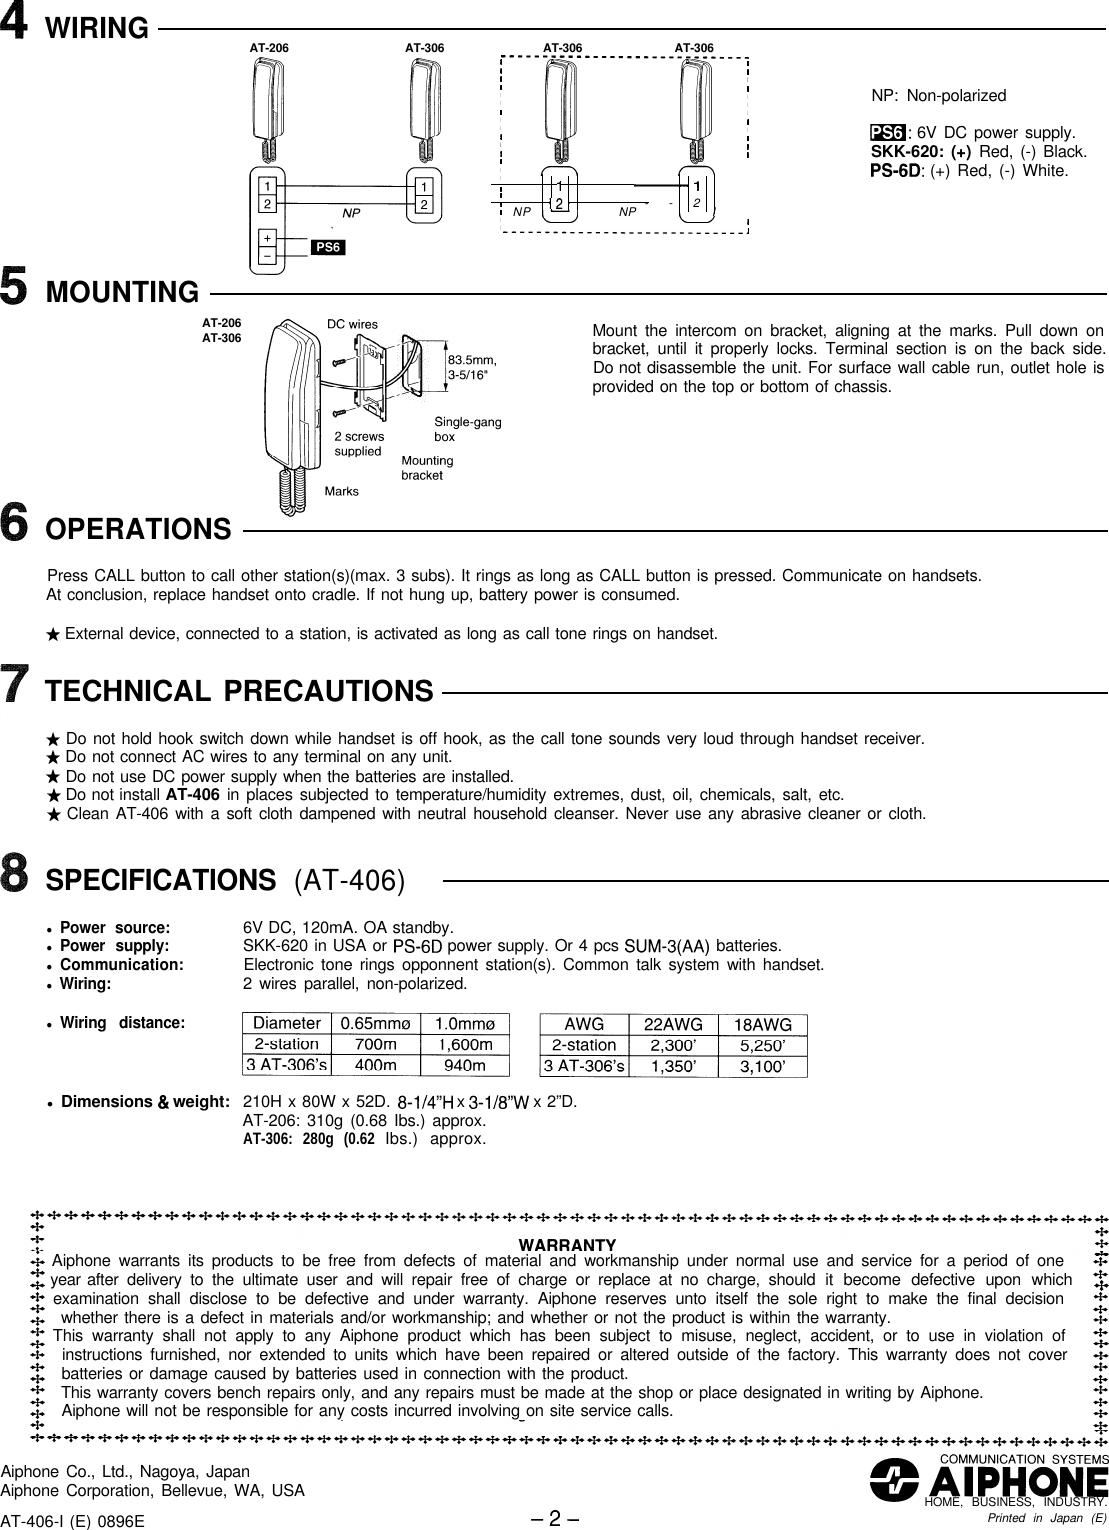 Page 2 of 2 - Aiphone AT-406 Visio-NE-NVP-2DC Instr, 0710 User Manual  To The 9ab0d42c-a109-4767-8a6f-8b68ecd32d95